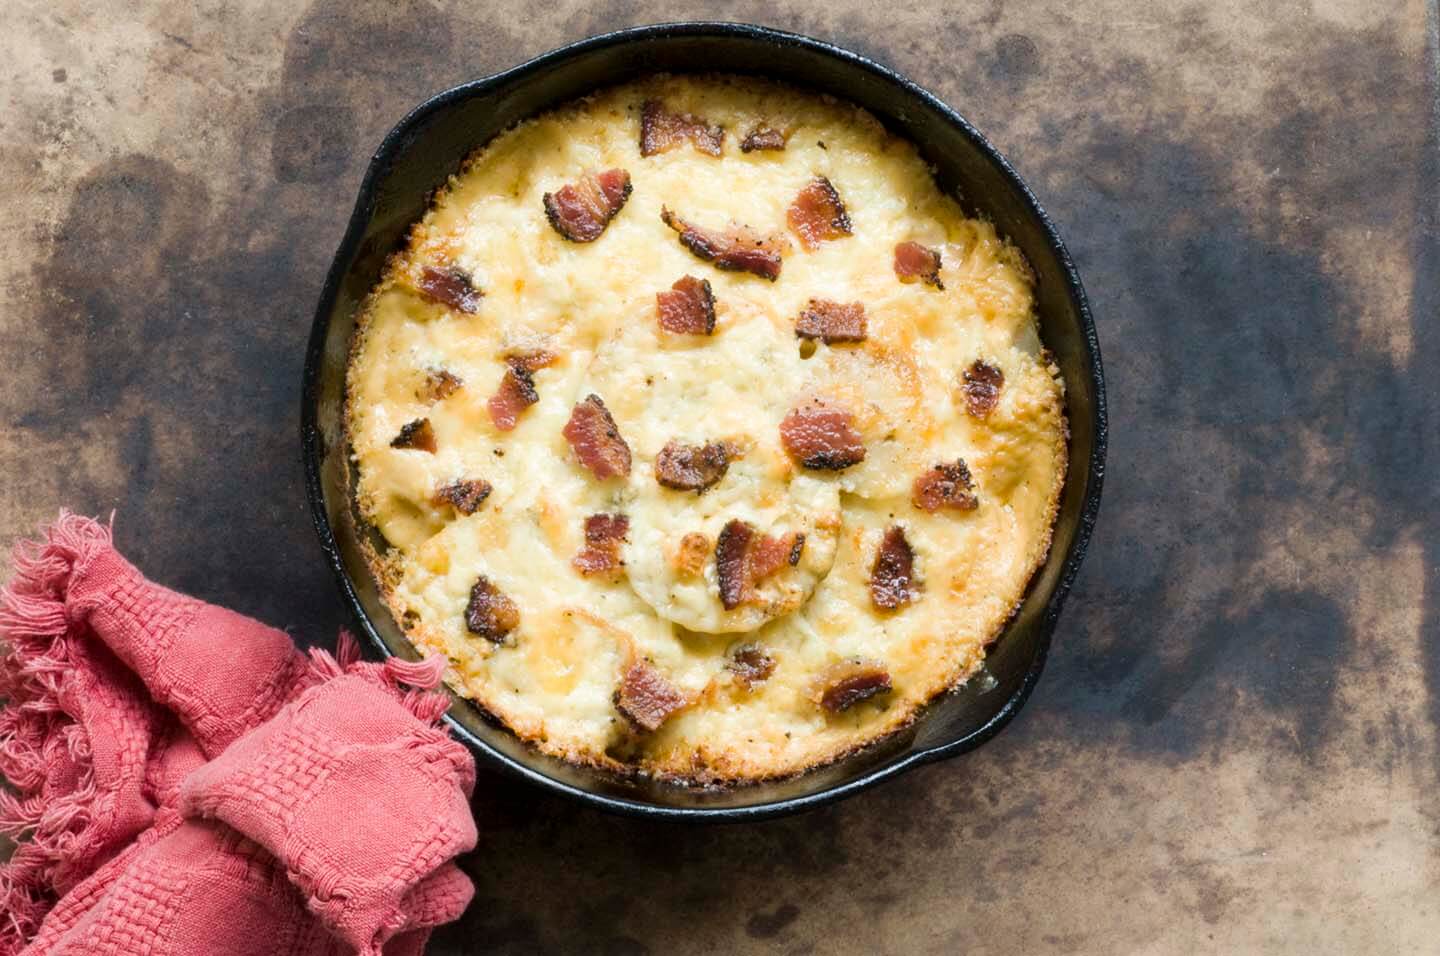 Blue cheese scalloped potatoes with chipotle and bacon | Homesick Texan